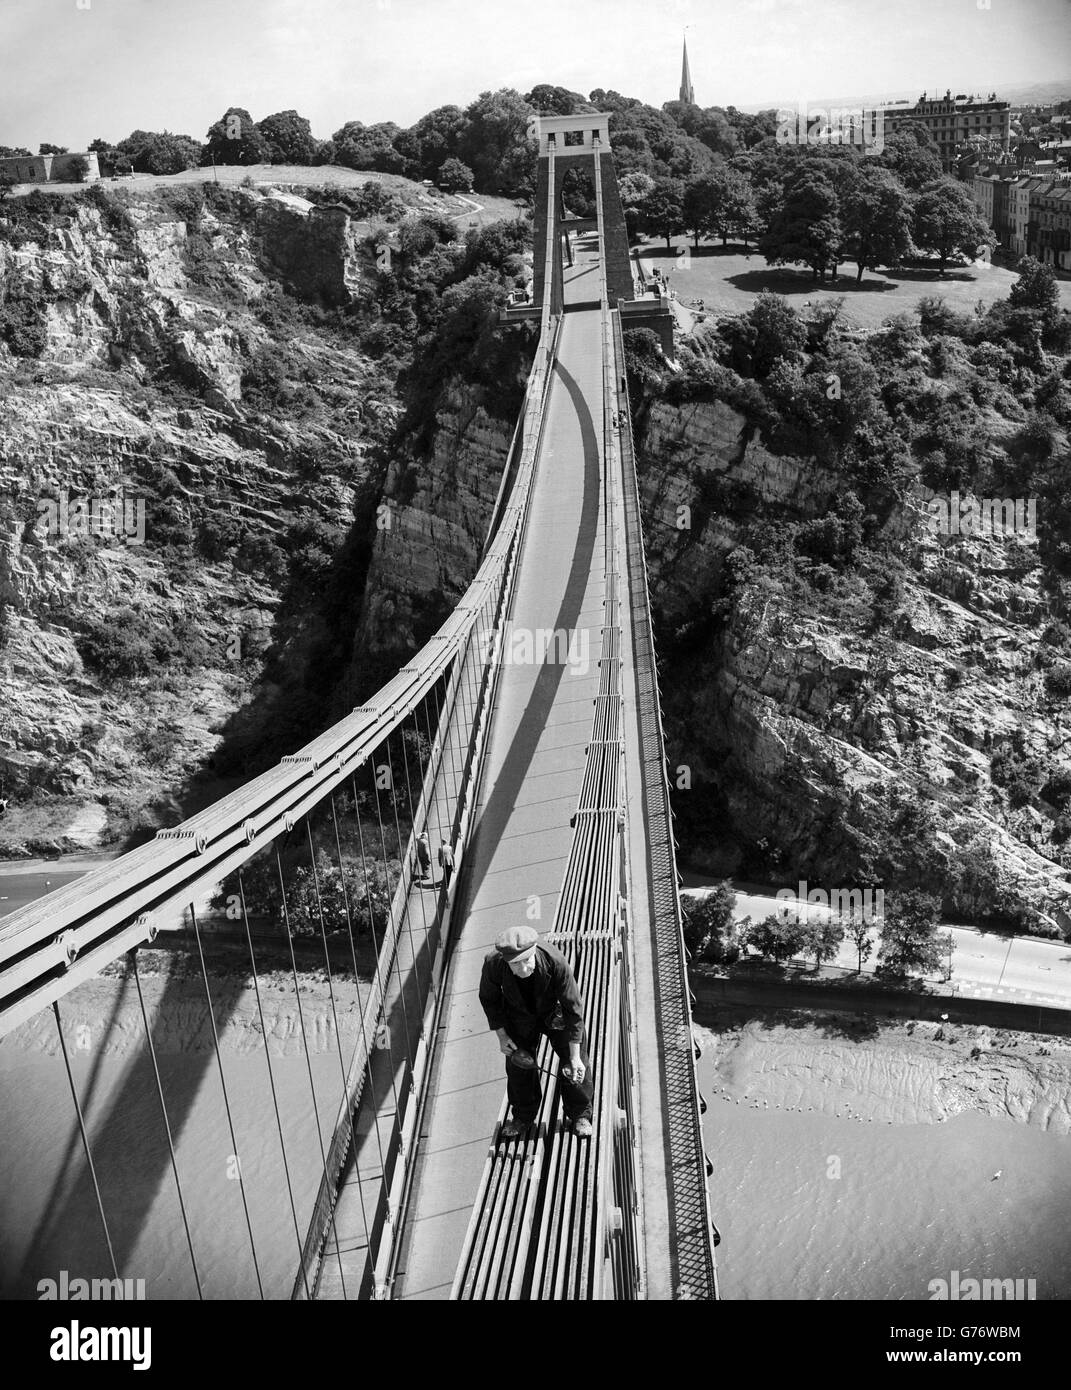 Perhaps the loftiest oiling job, and the coolest, in Britain is carried out by this workman, surefooted on the steep chains of the Clifton Suspension Bridge, 330 feet above the River Avon, Bristol. He inspects and oils the joints on the chains of the bridge. The bridge was designed by Isambard Kingdom and was completed in 1864. Stock Photo